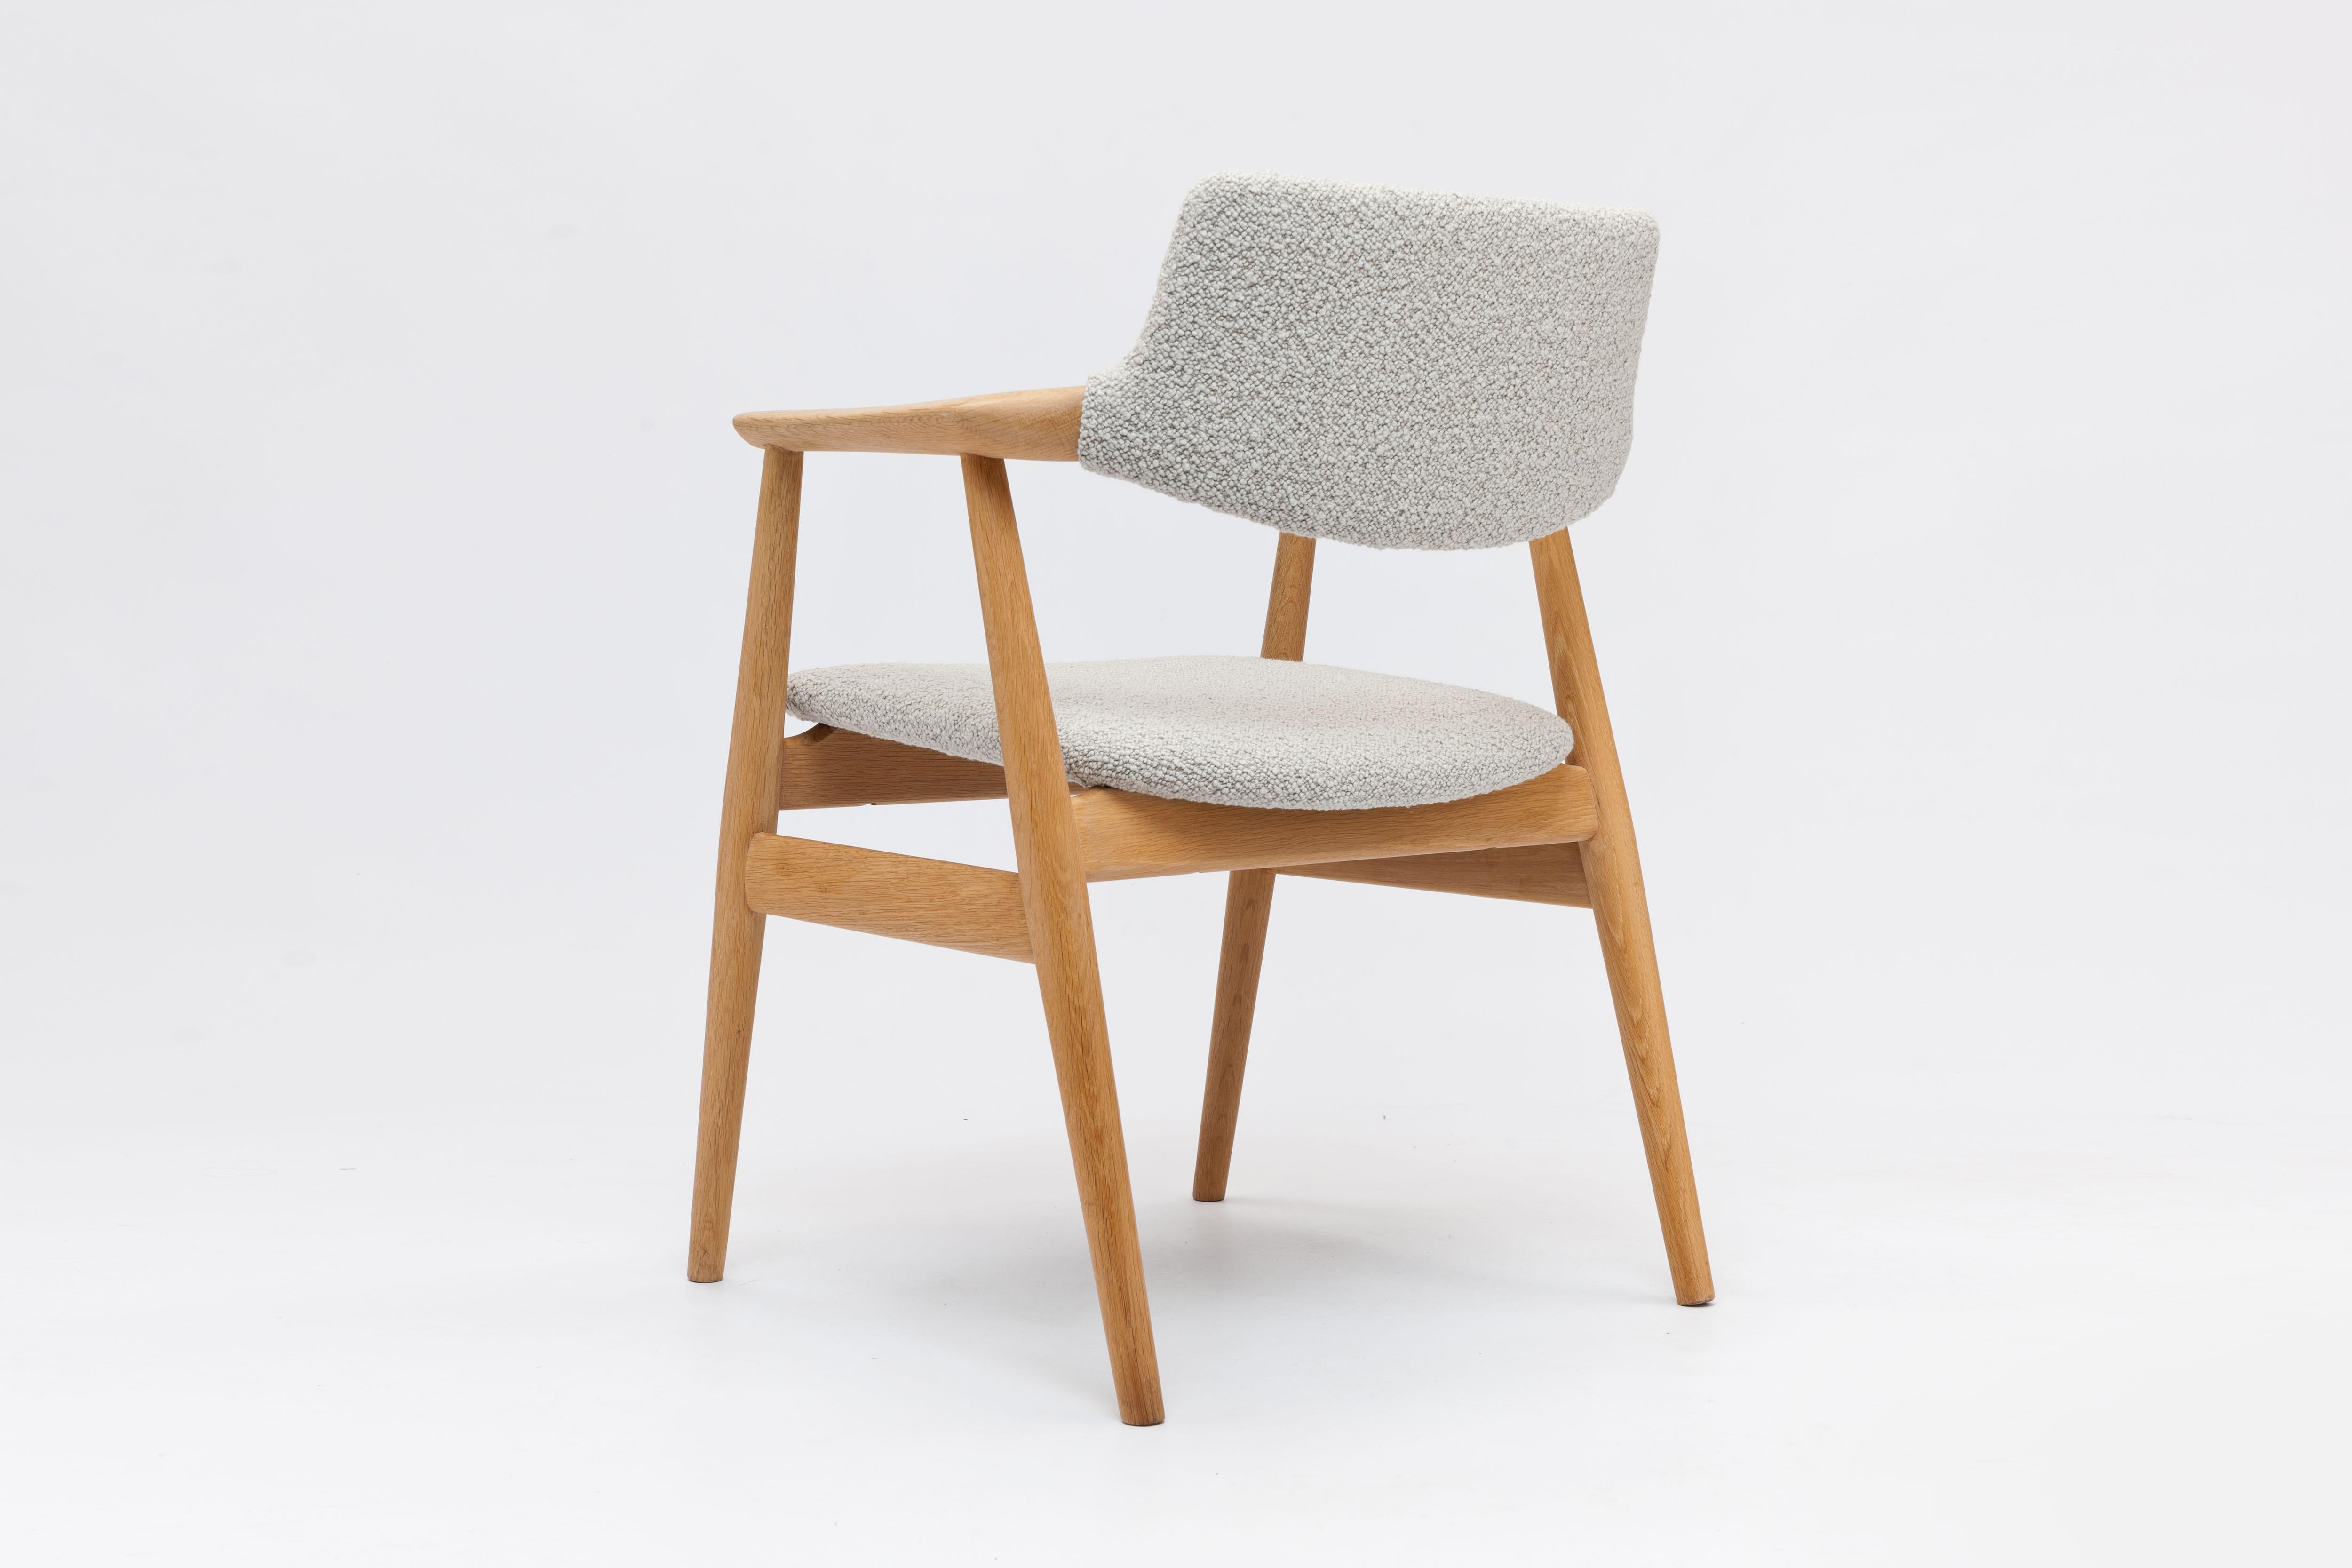 Set of 4 solid oak arm chairs by Danish designer Svend Åge Eriksen designed in 1962 for Glostrup Møbelfabrik, Denmark.

The floating back support of this design is a striking and beautiful feature of this timeless design executed from solid oak